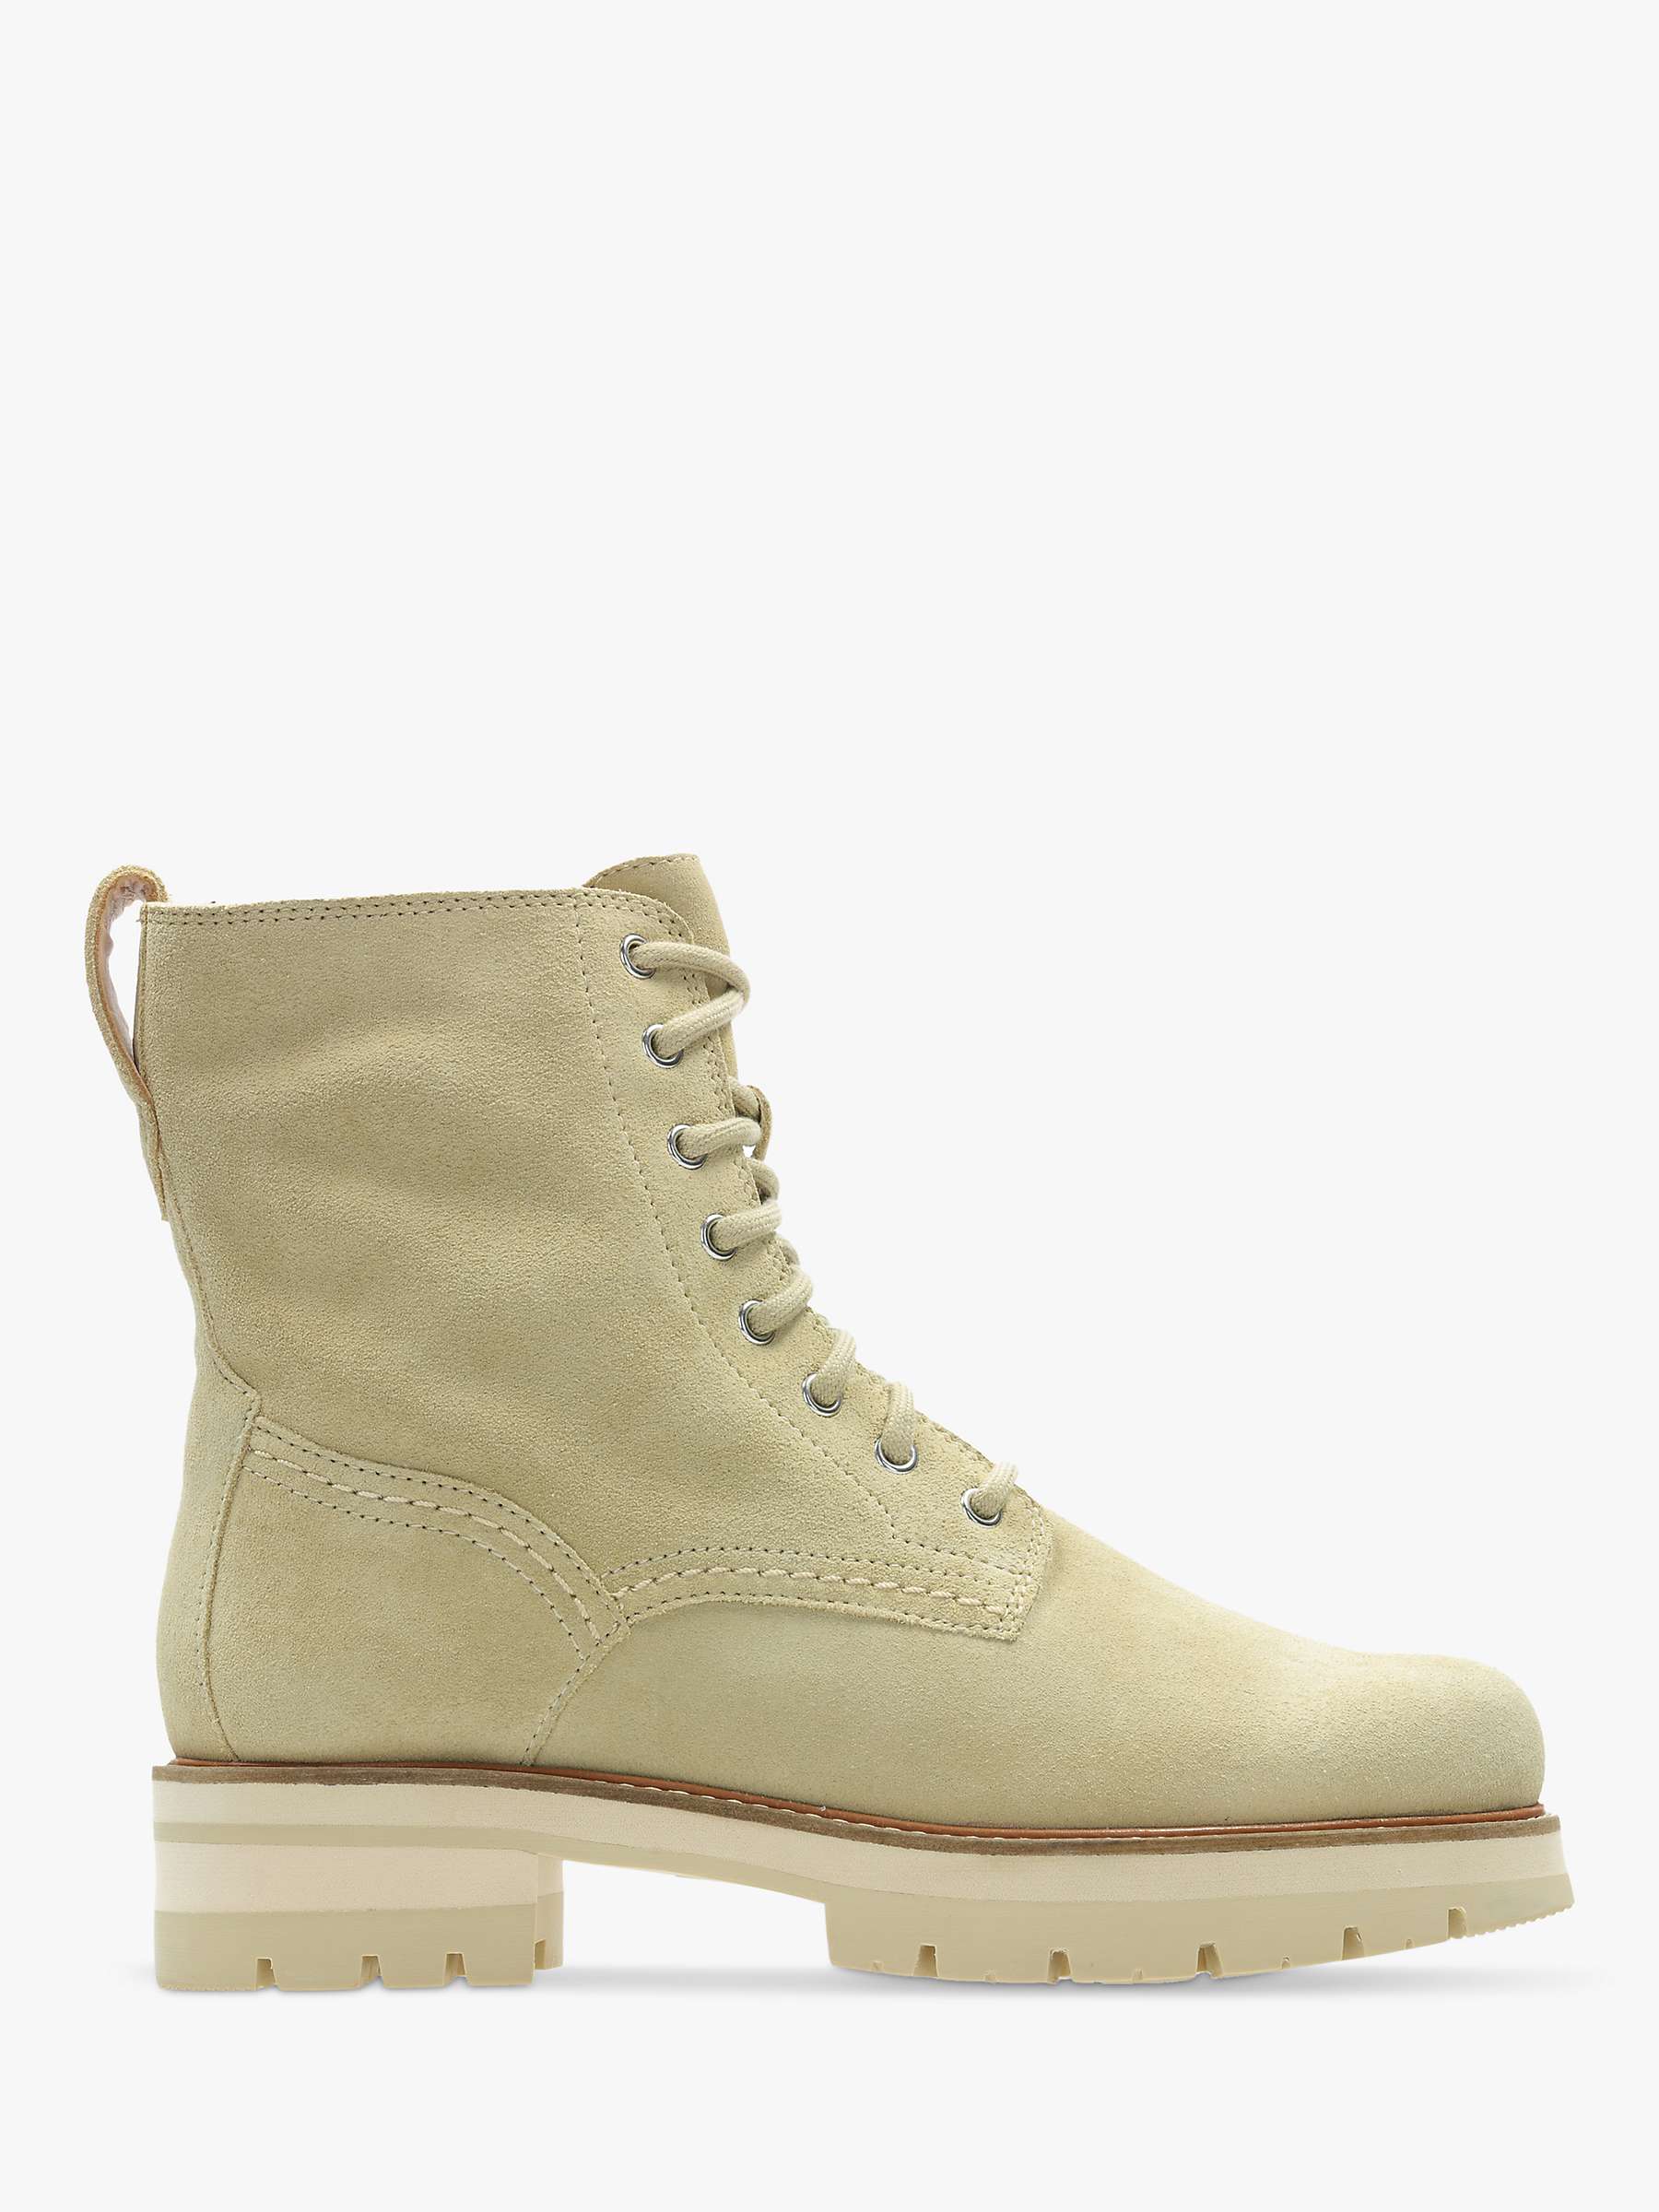 Clarks Orianna Suede Hiker Boots, Taupe at John Lewis & Partners